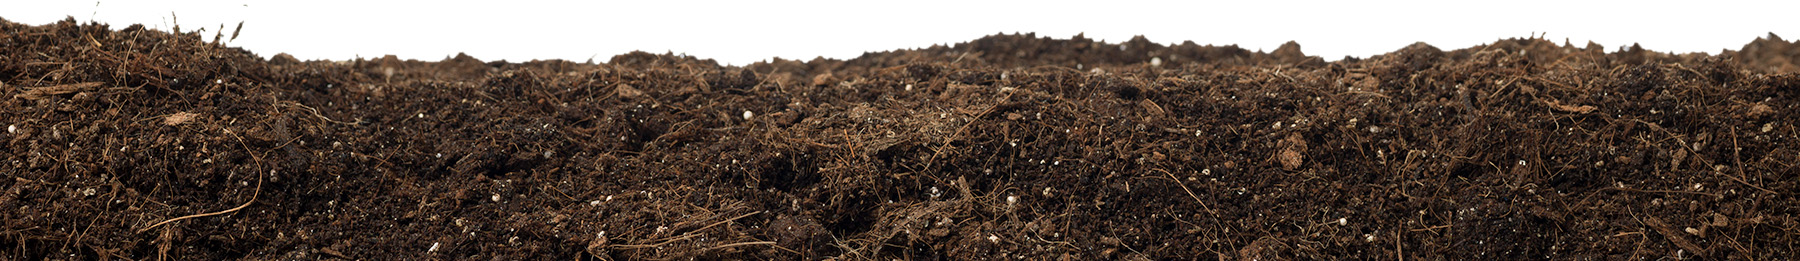 How To Grow Your Own Food Footer Dirt